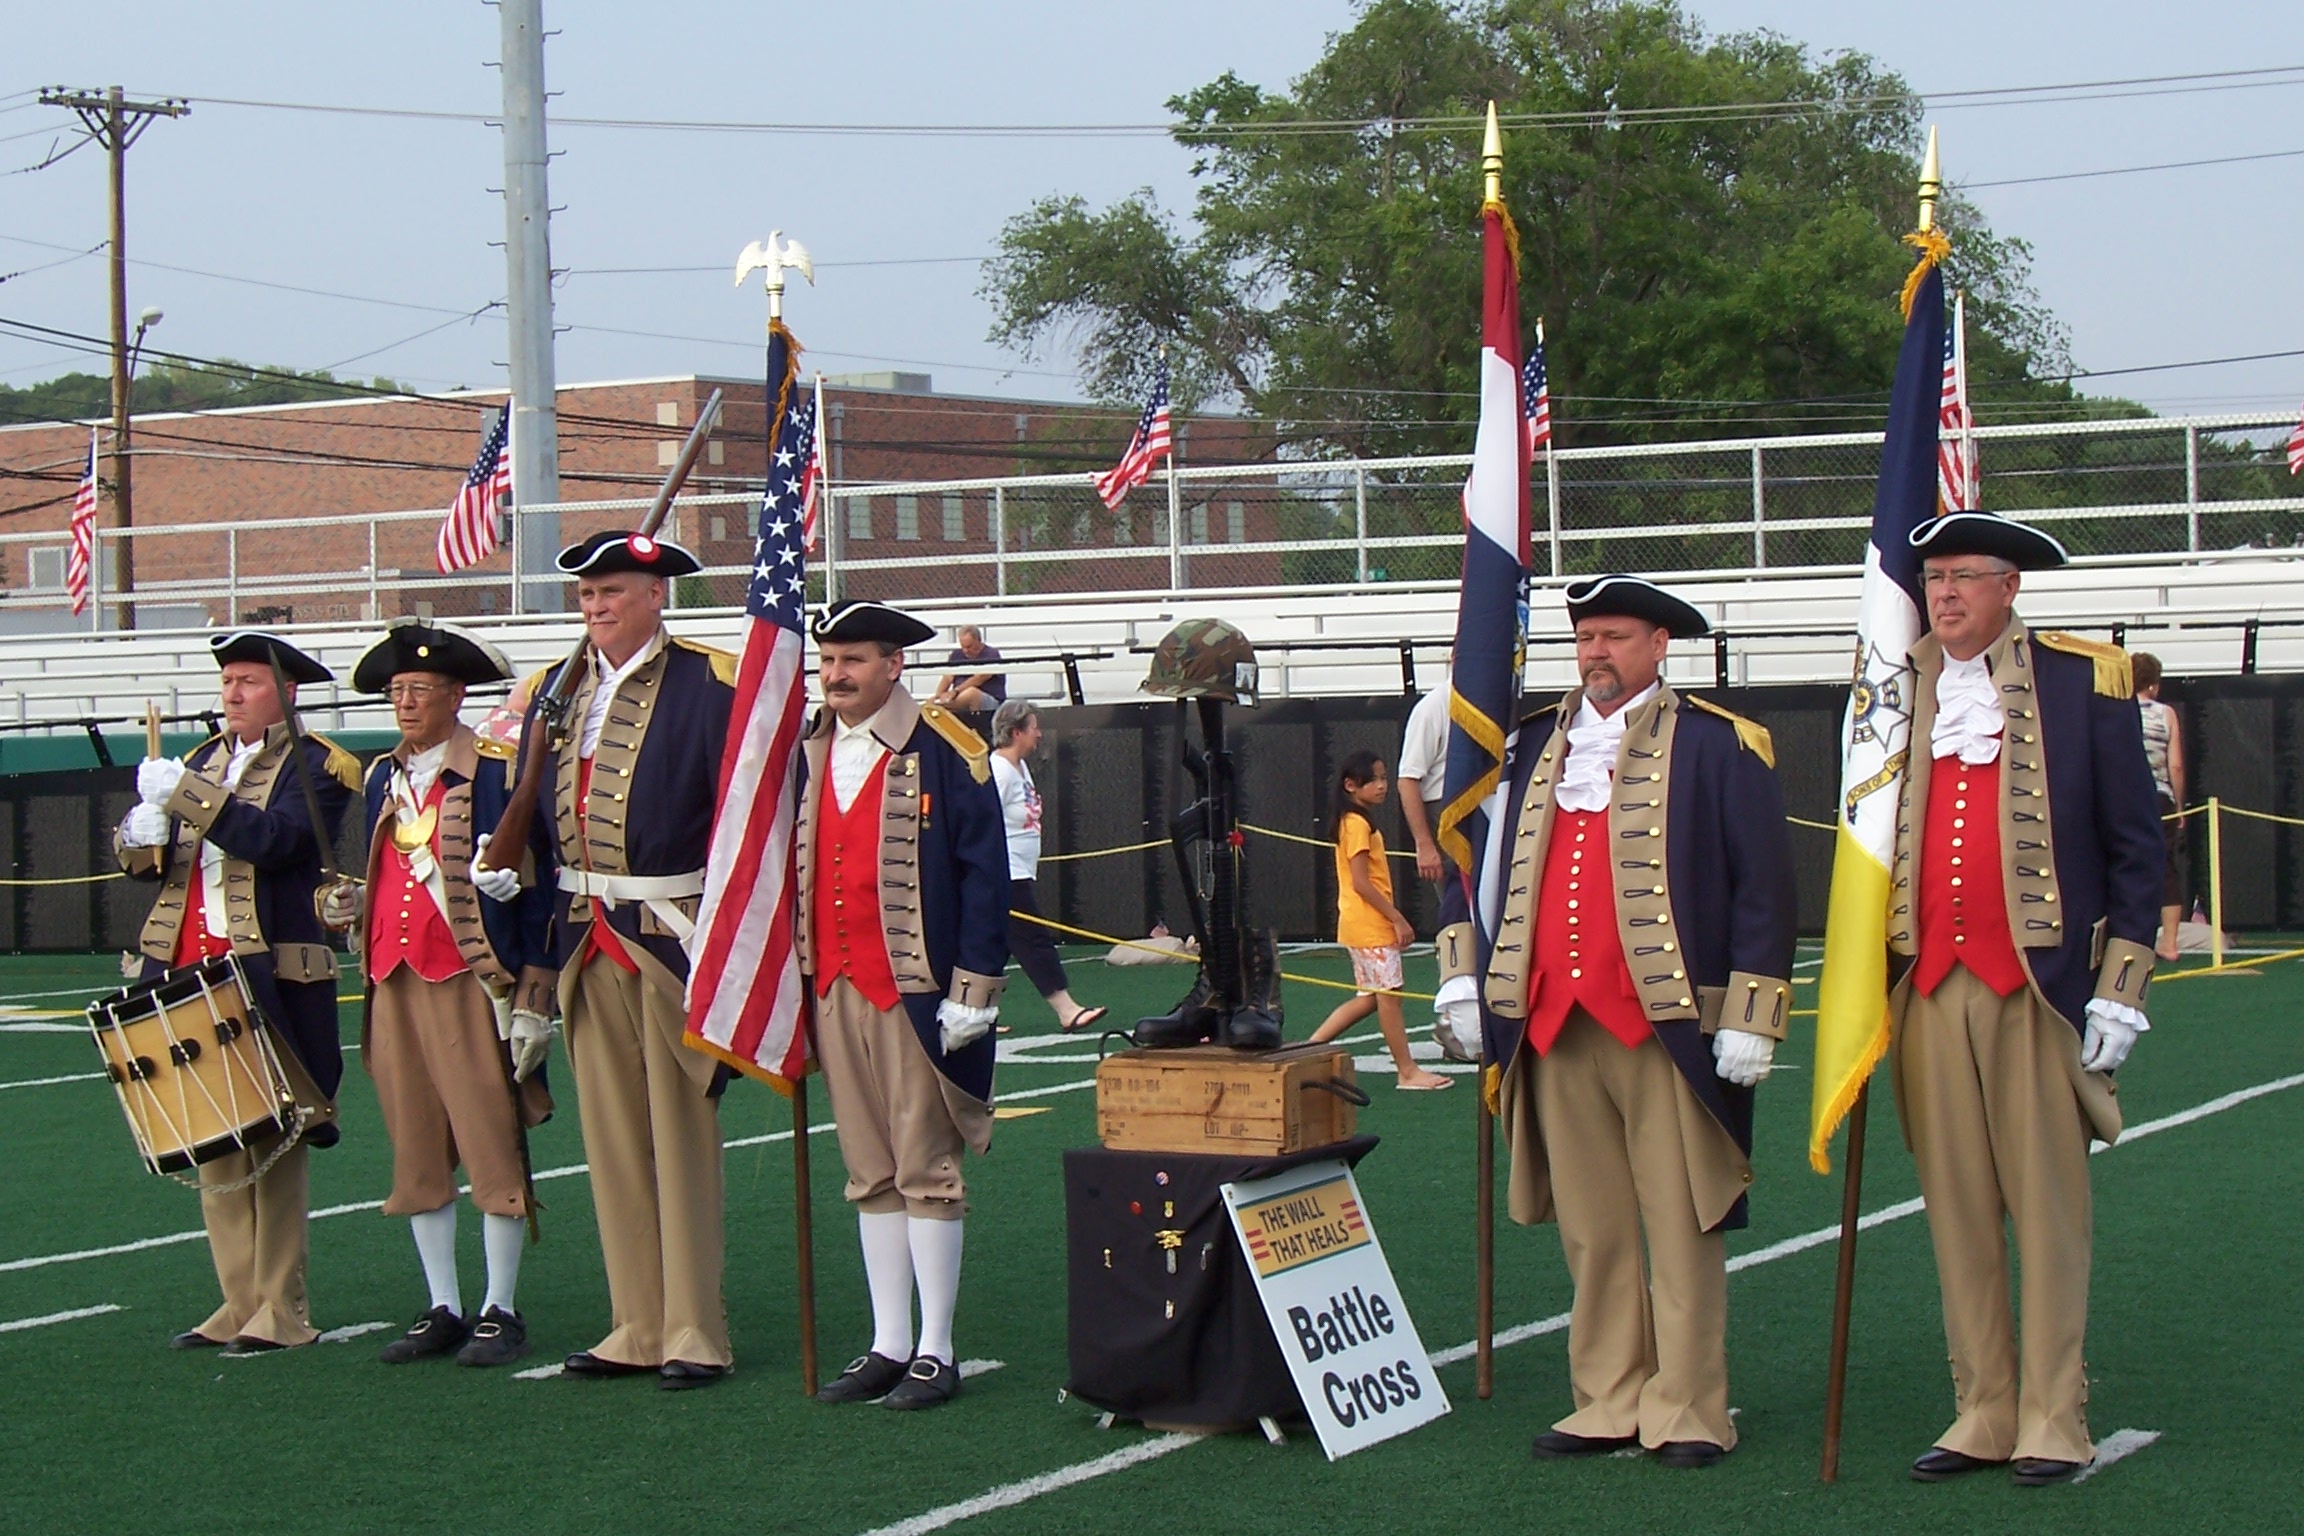 The MOSSAR Color Guard Team participated at the Closing Ceremony each day on June 28 - July 1, 2012 at ''The Wall That Heals'' which was held at North Kansas City High School Footbal Stadium in North Kansas City, MO. It is estimated that over 15,000 people attended this event over the four day period.